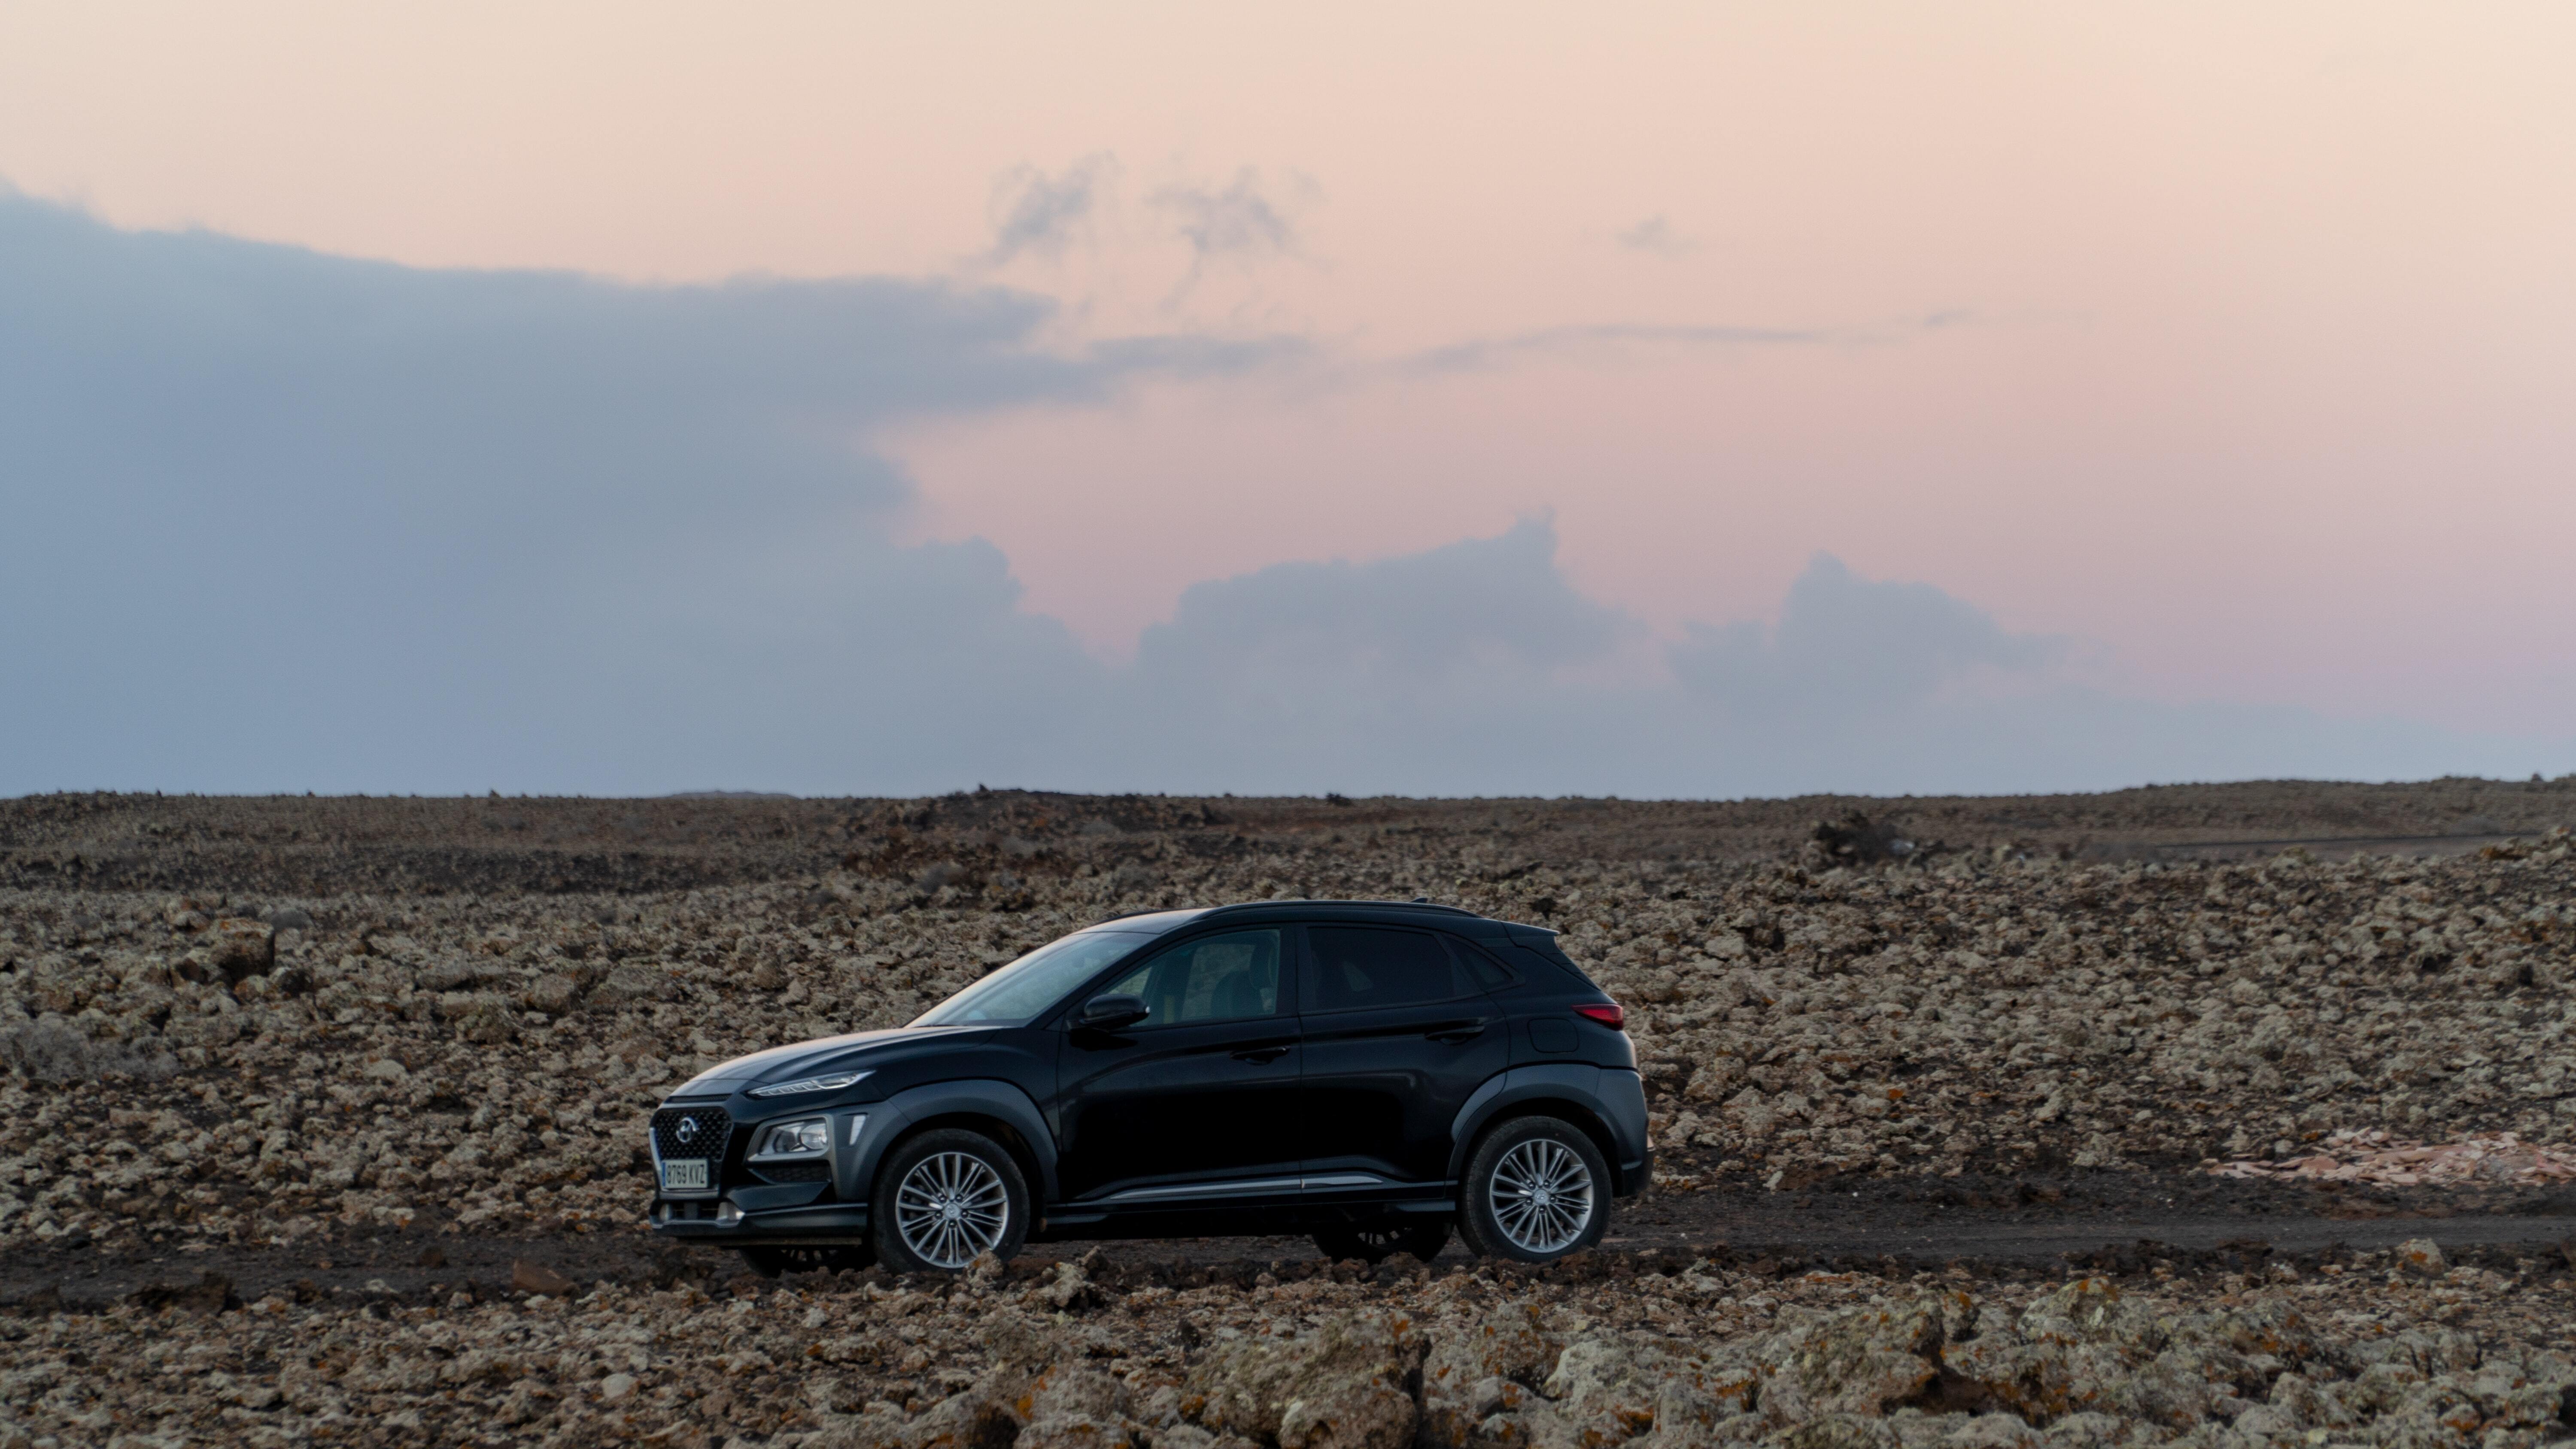 A Hyundai Kona parked in a barren area during sunset.